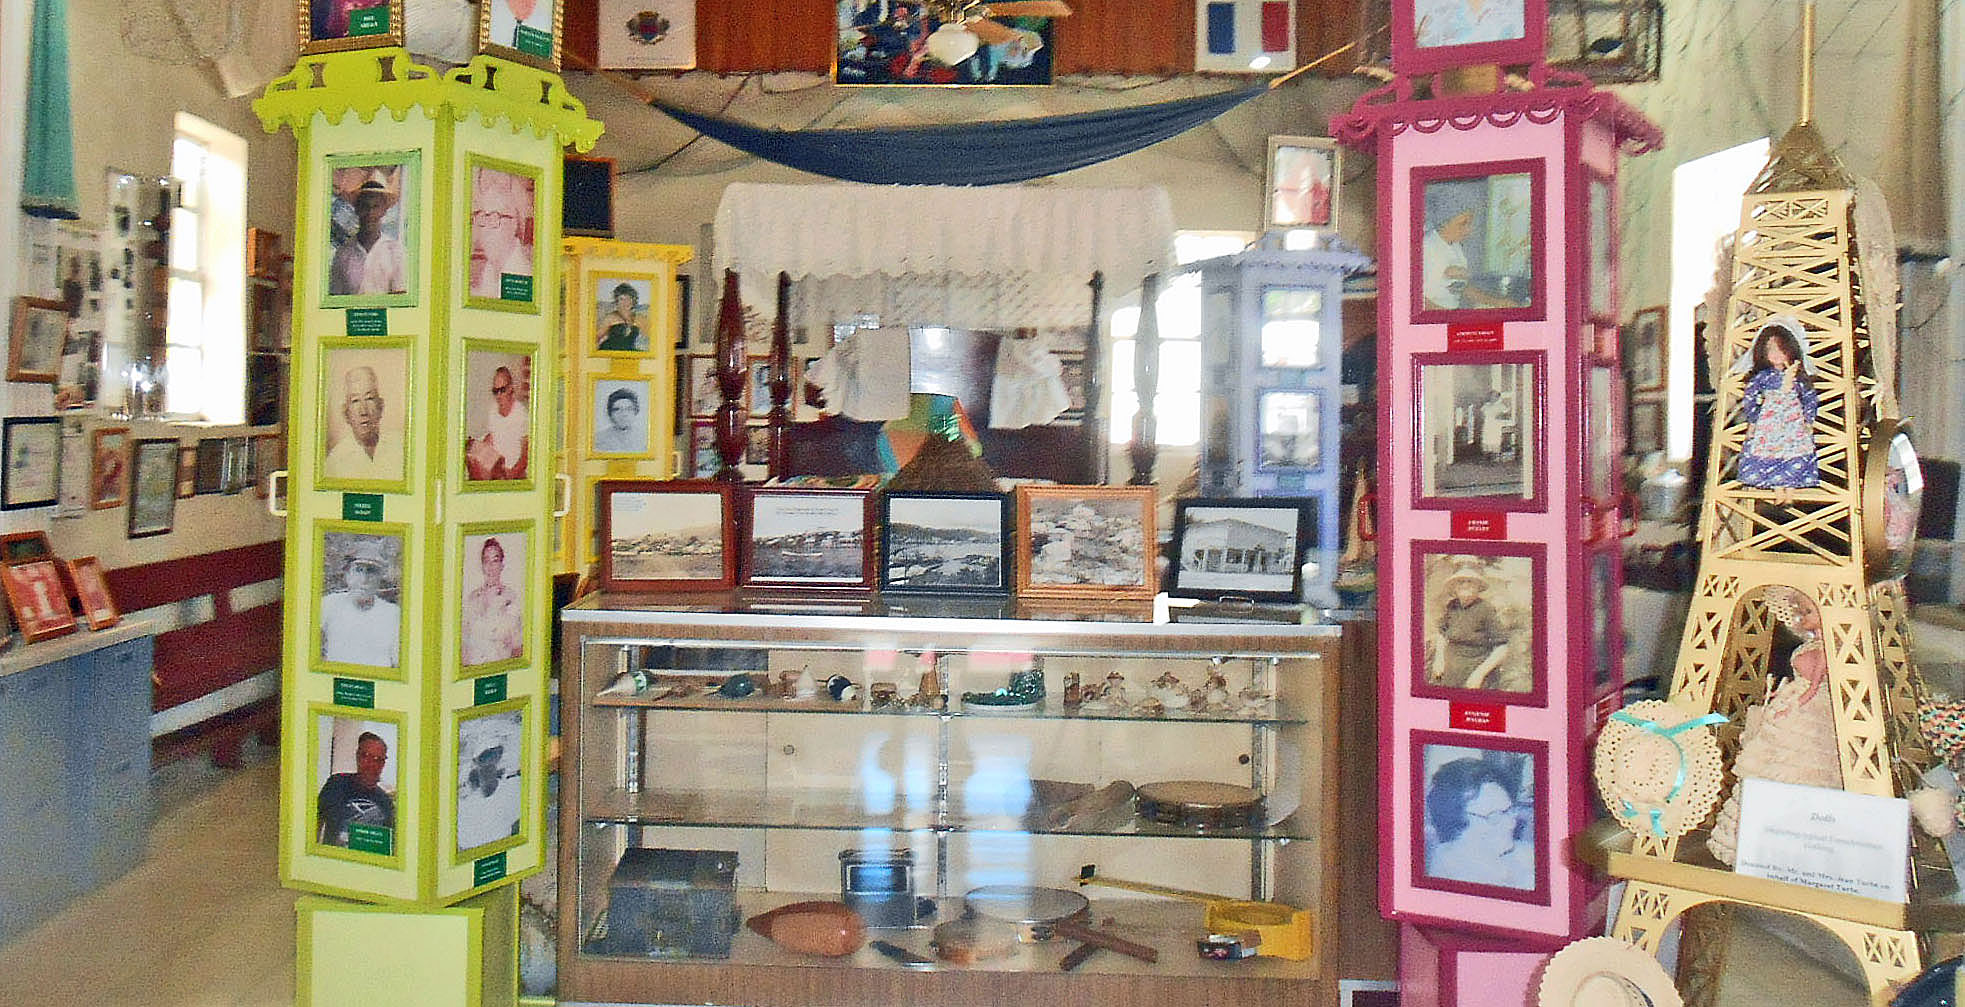 Photos and other items fills the museum's shelves.